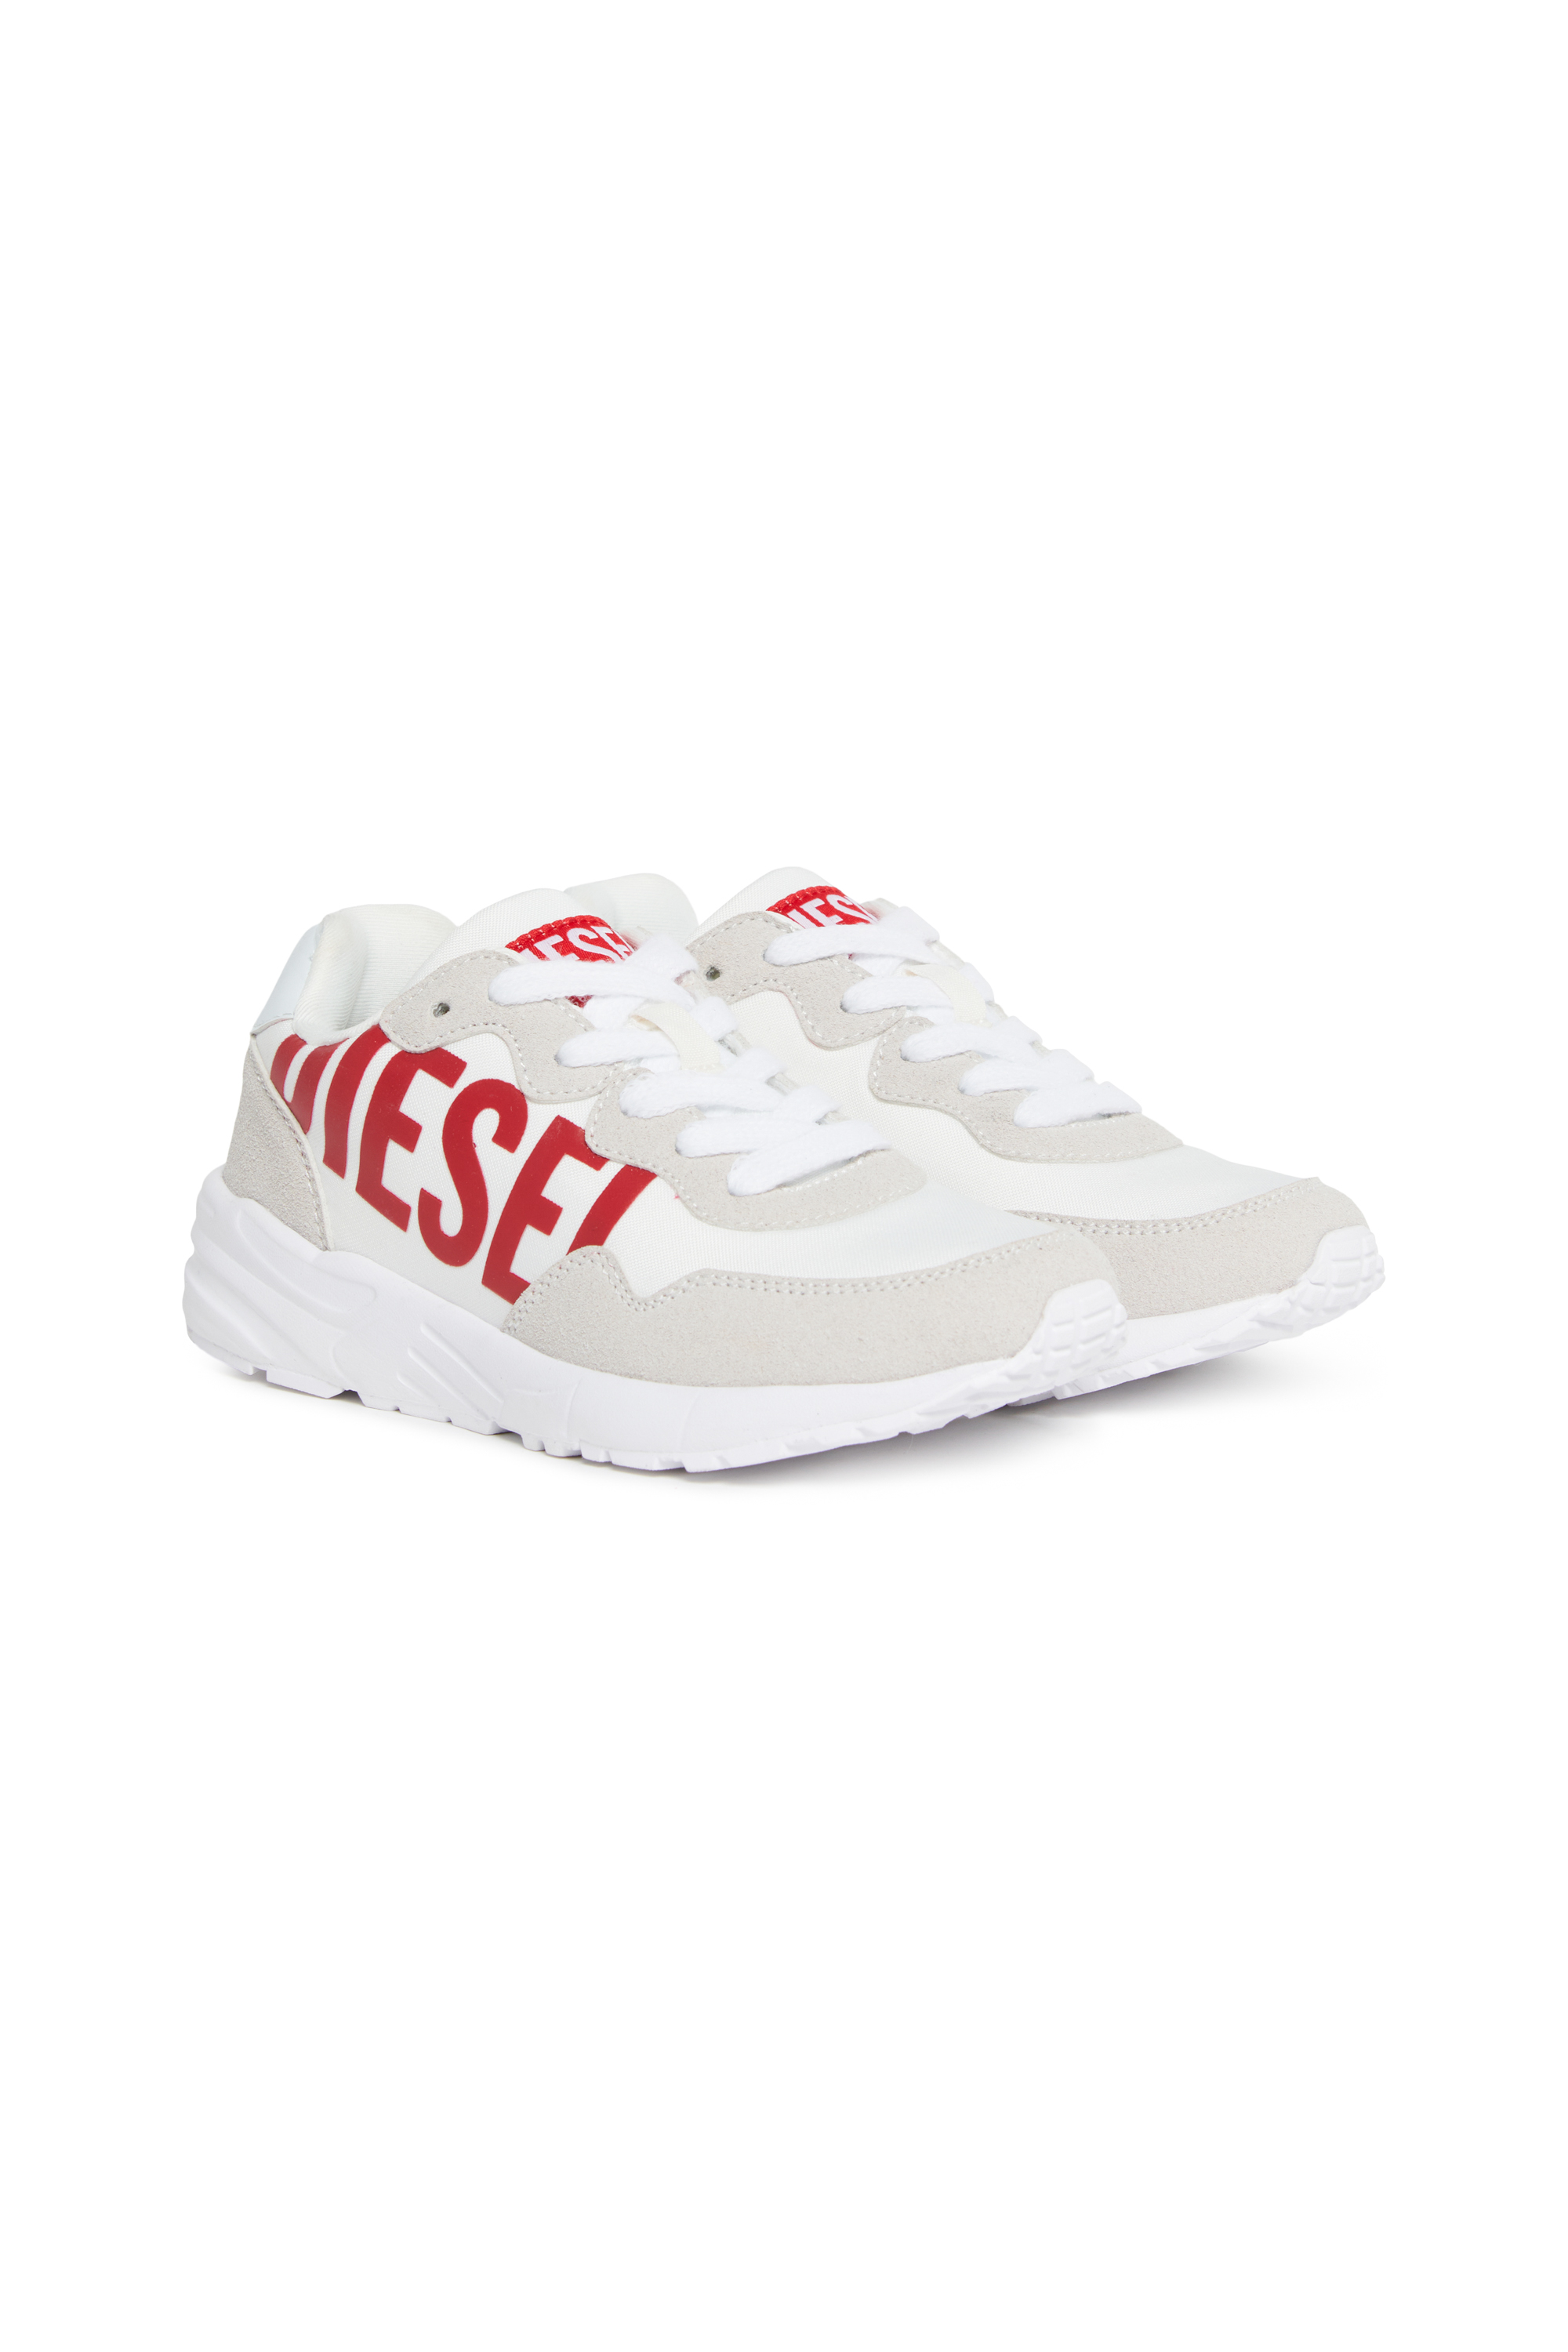 Diesel - S-STAR LIGHT LC, Unisex Nylon sneakers with shiny Diesel print in Multicolor - Image 3